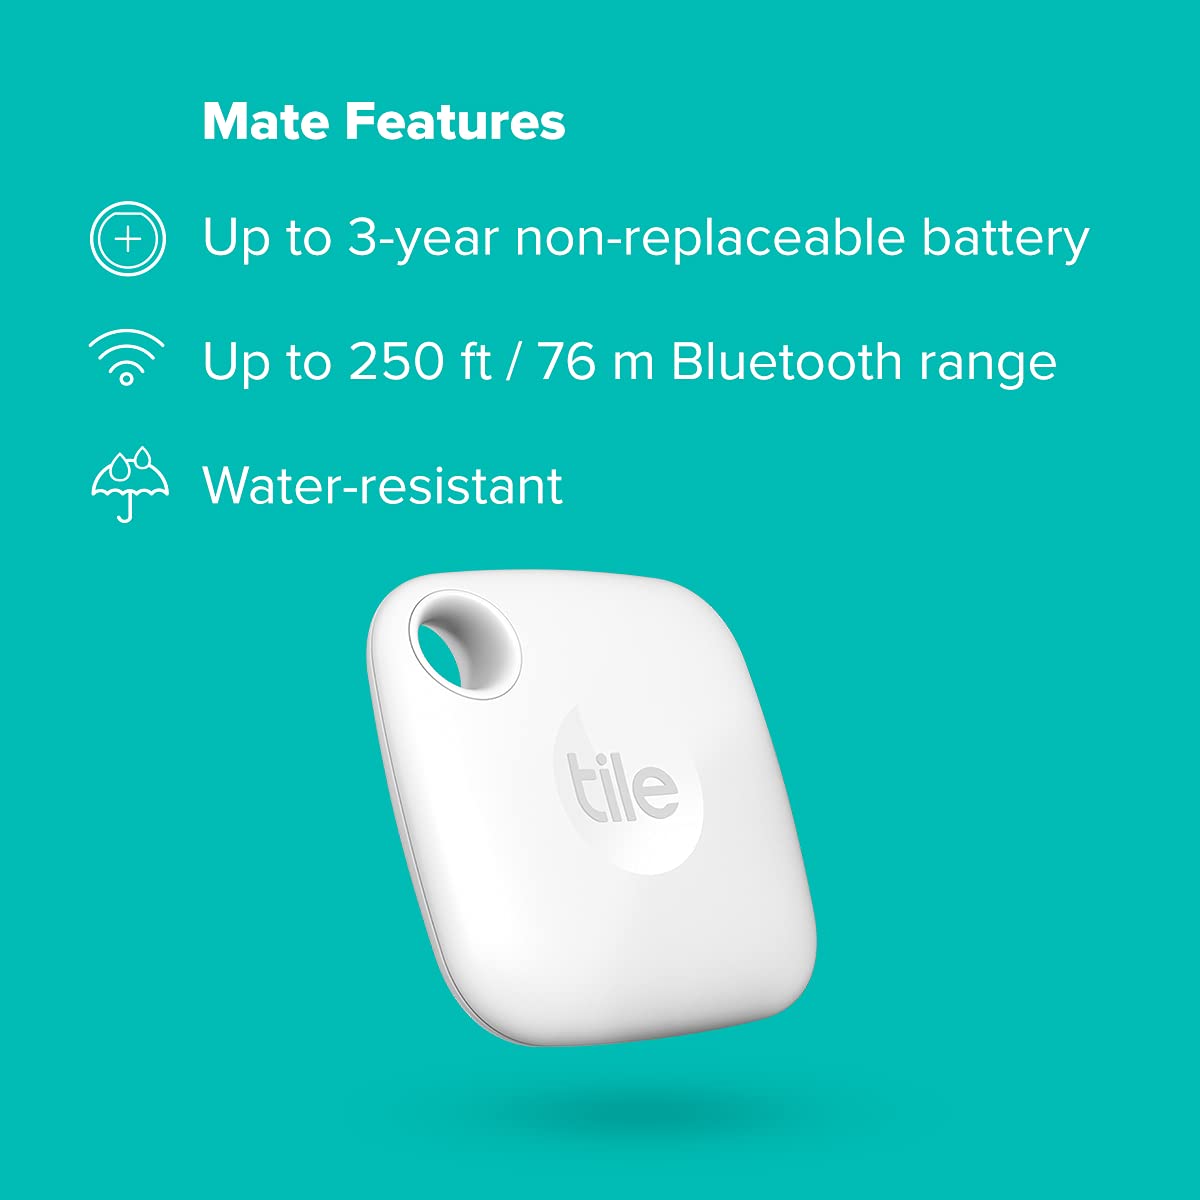 Tile Mate 1-Pack, White. Bluetooth Tracker, Keys Finder and Item Locator; Up to 250 ft. Range. Up to 3 Year Battery. Water-Resistant. Phone Finder. iOS and Android Compatible.